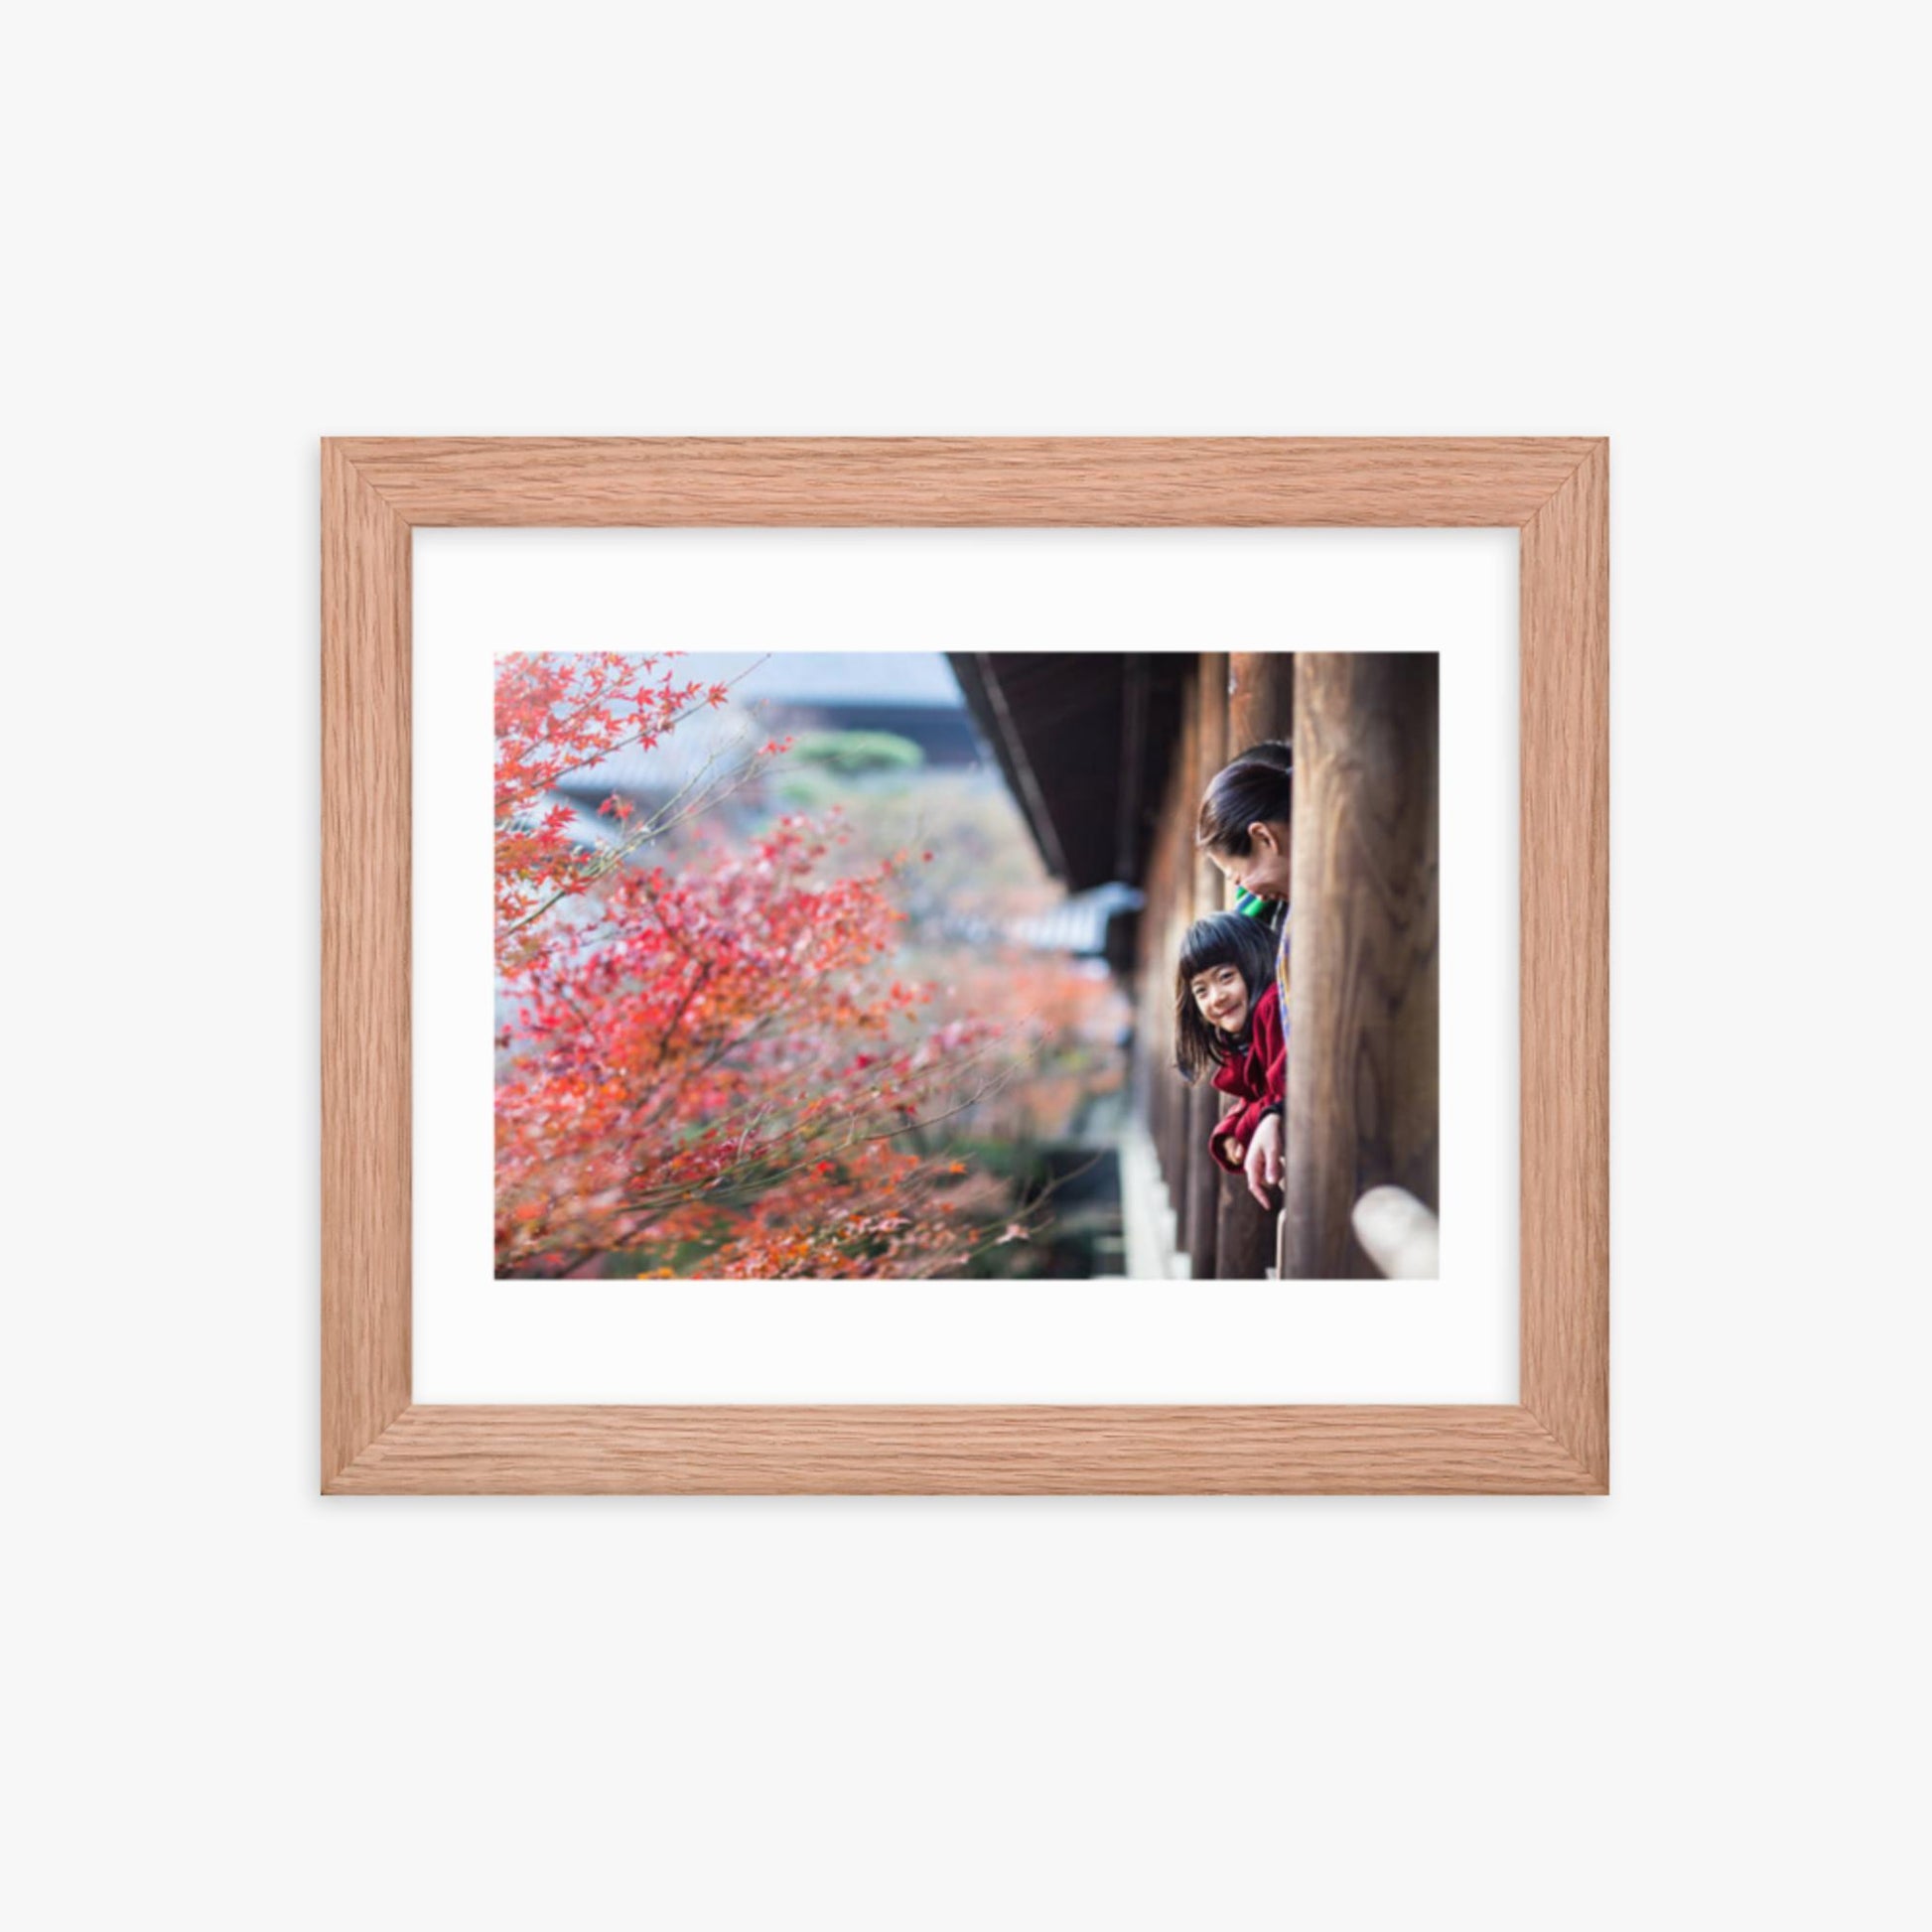 Father, mother and daughter at a temple enjoying autumn leaves 8x10 in Poster With Oak Frame